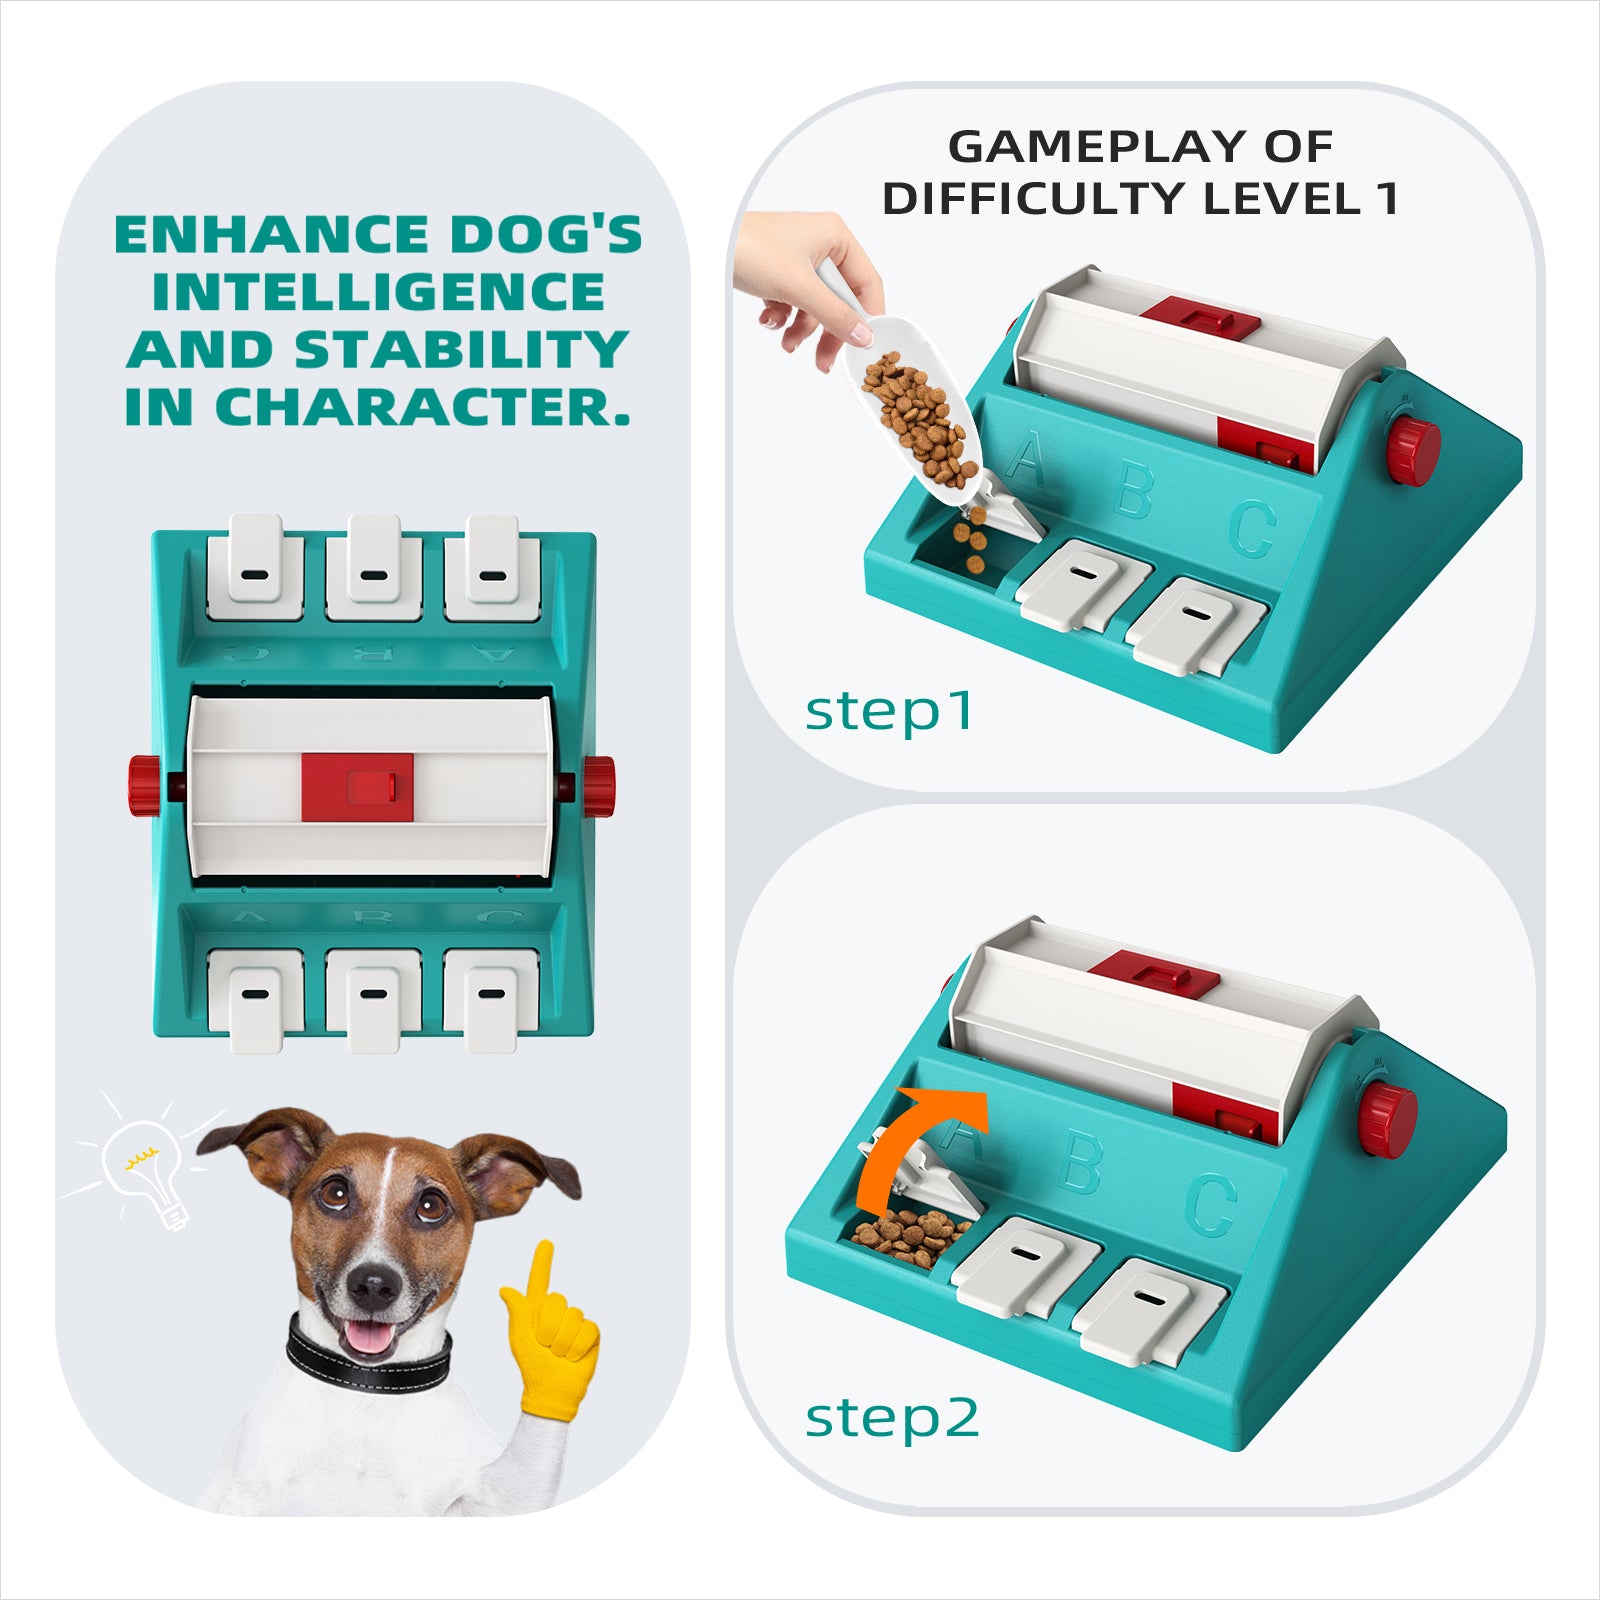 KADTC Dog Puzzle Toys for Medium/Small Dogs Slow Blow Puzzles Feeder Food Dispenser Treat Feeding Level 2 in 1 Puppy Interactive Games Boredom Mentally Stimulating Brain Toy Mental Stimulation